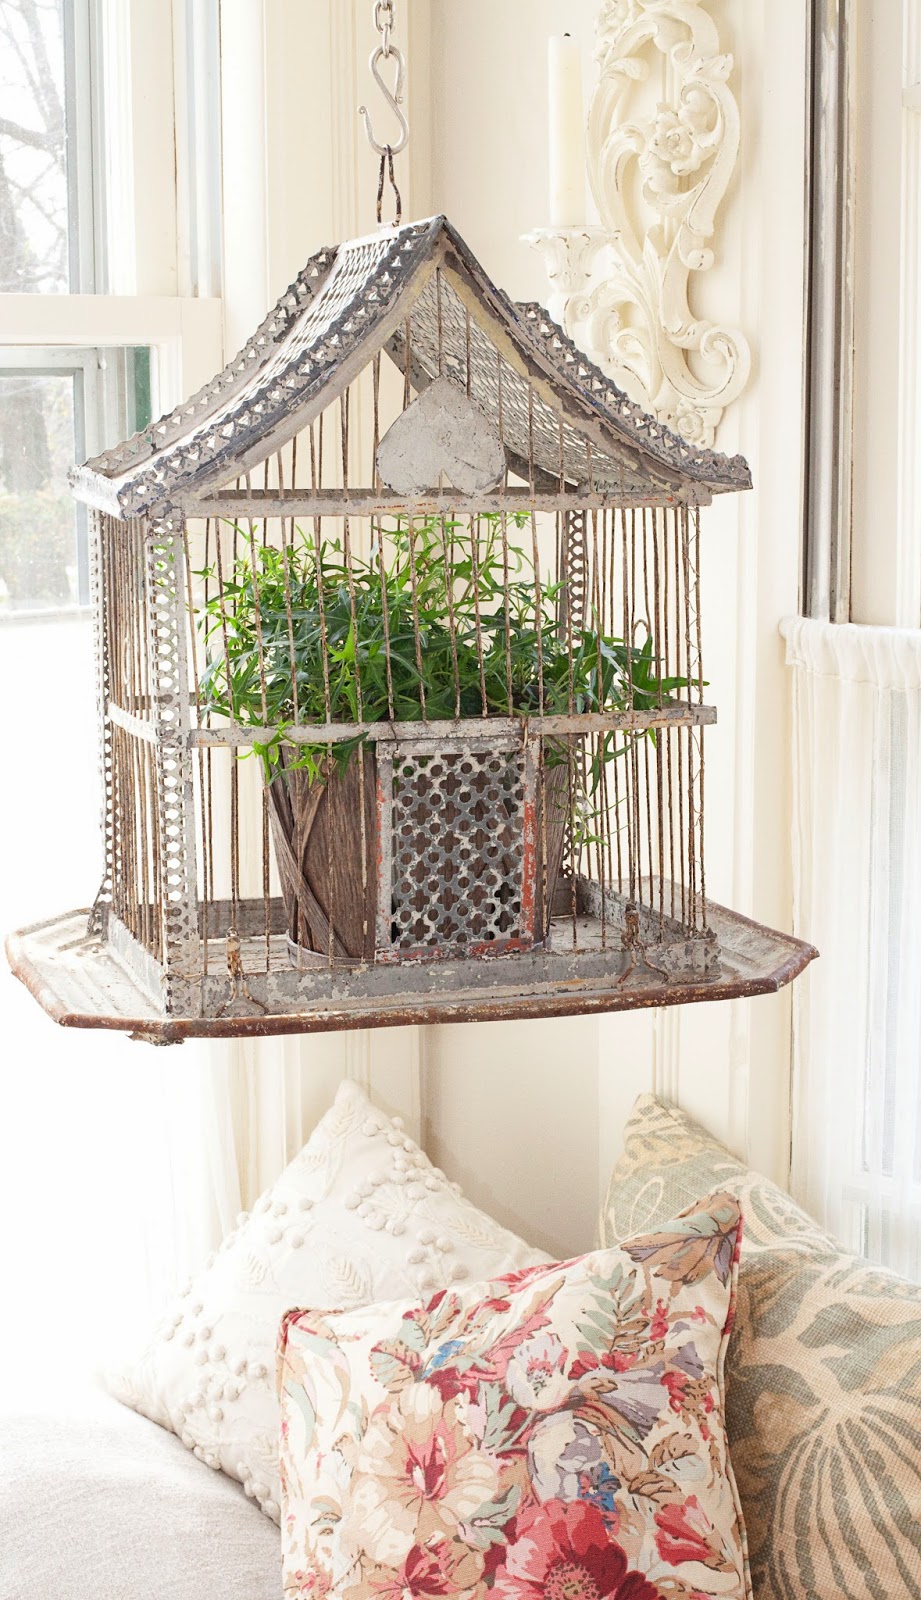 How to Turn a Decorative Bird Cage into a Charming Vignette - South House  Designs